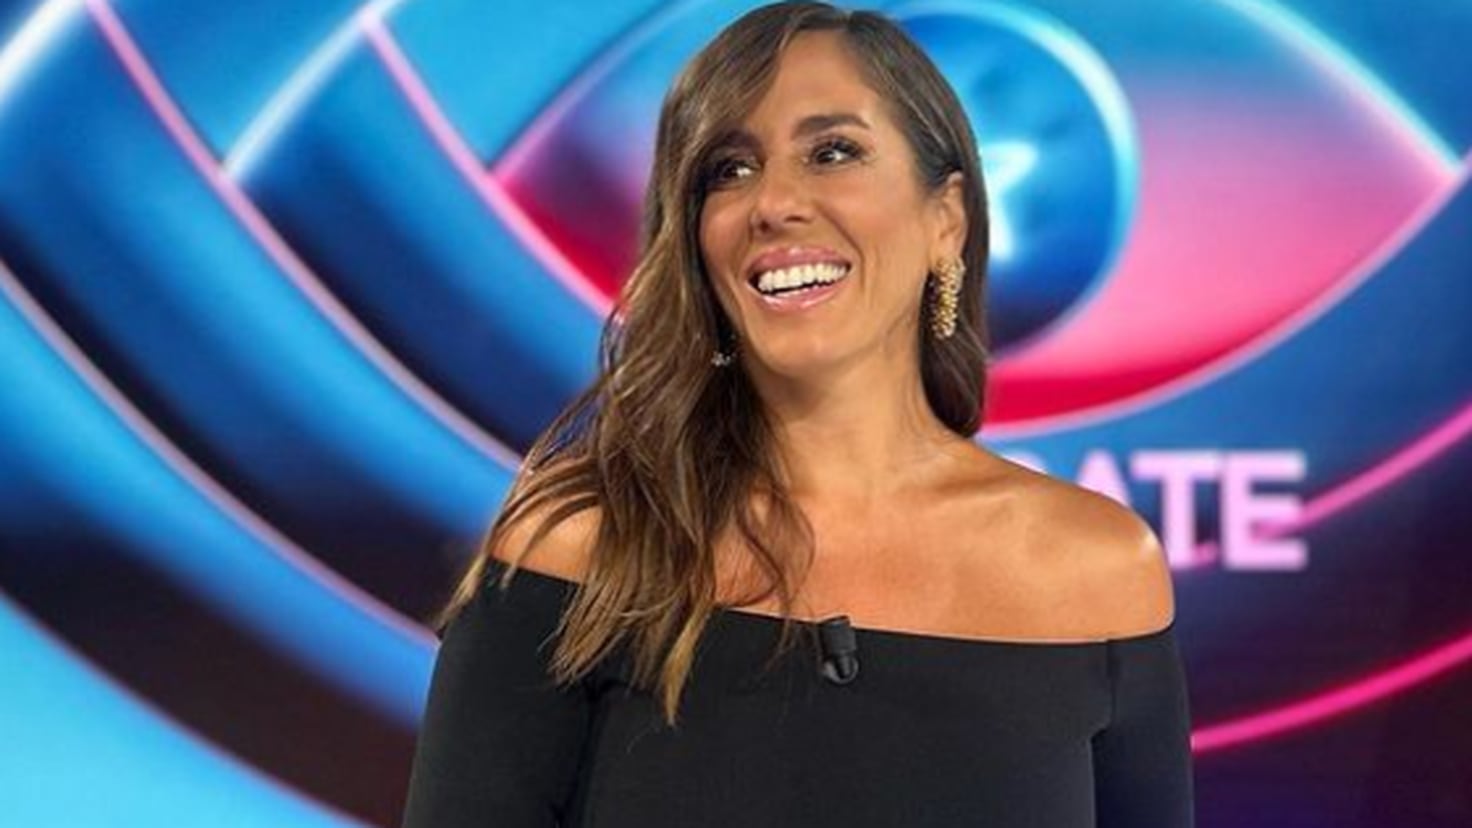 Anabel Pantoja remembers her controversial departure from Slvame: That program has killed me
